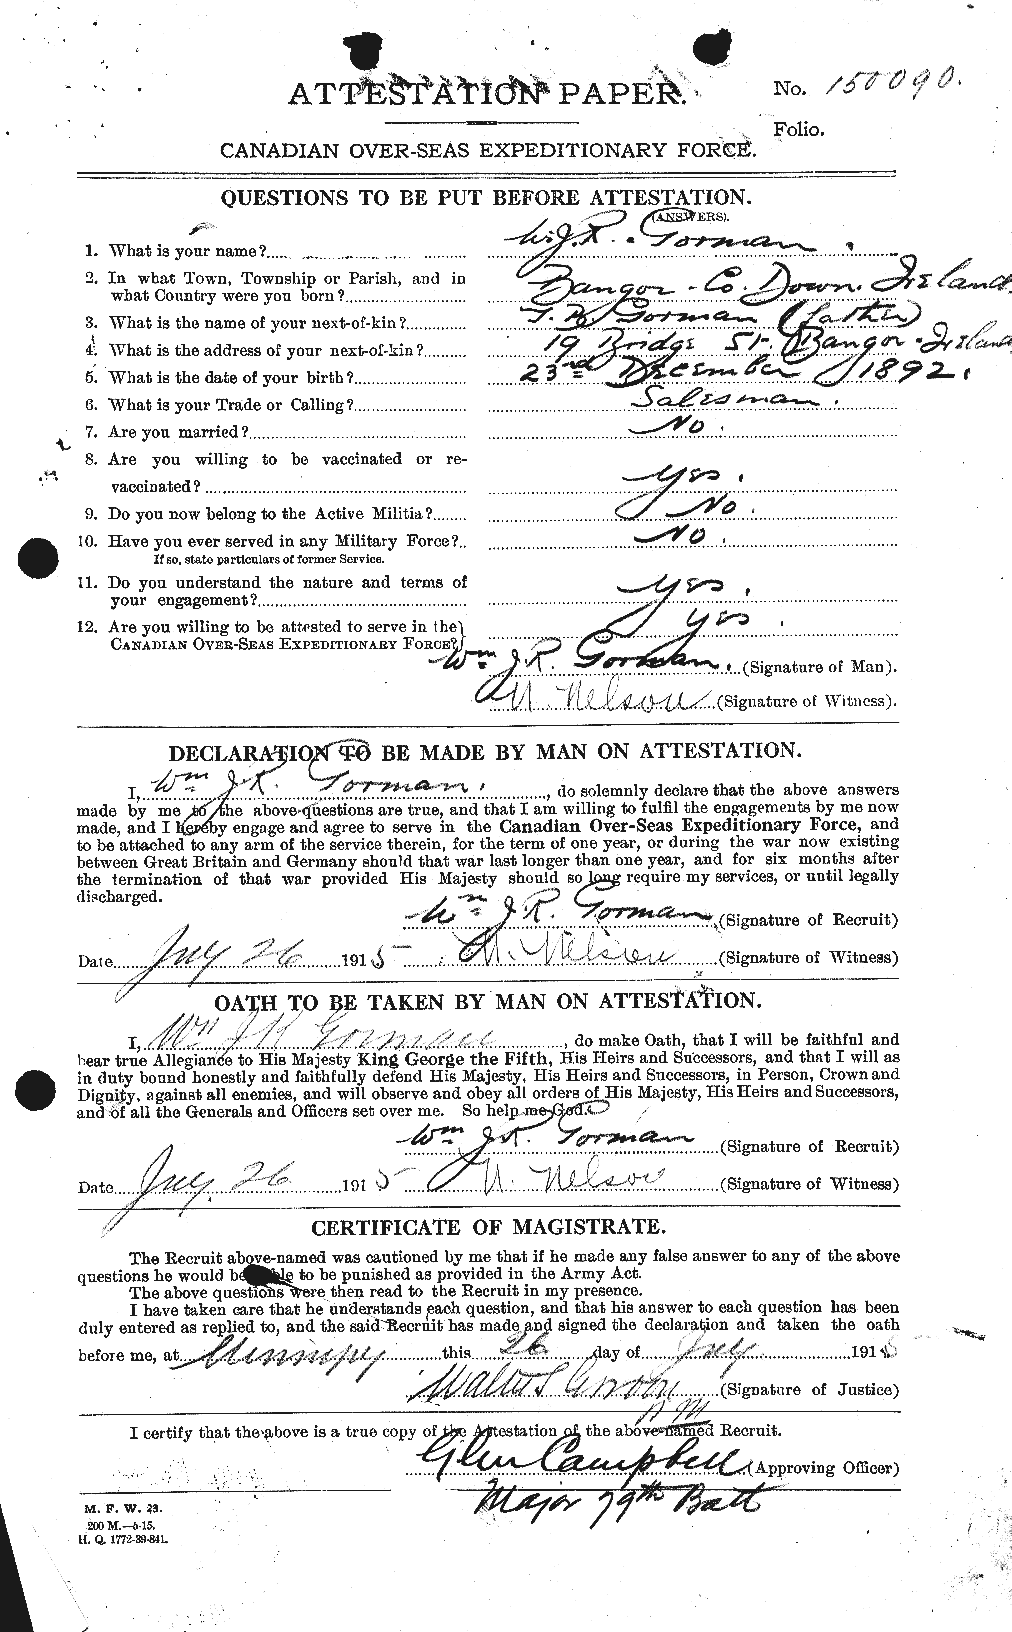 Personnel Records of the First World War - CEF 358139a